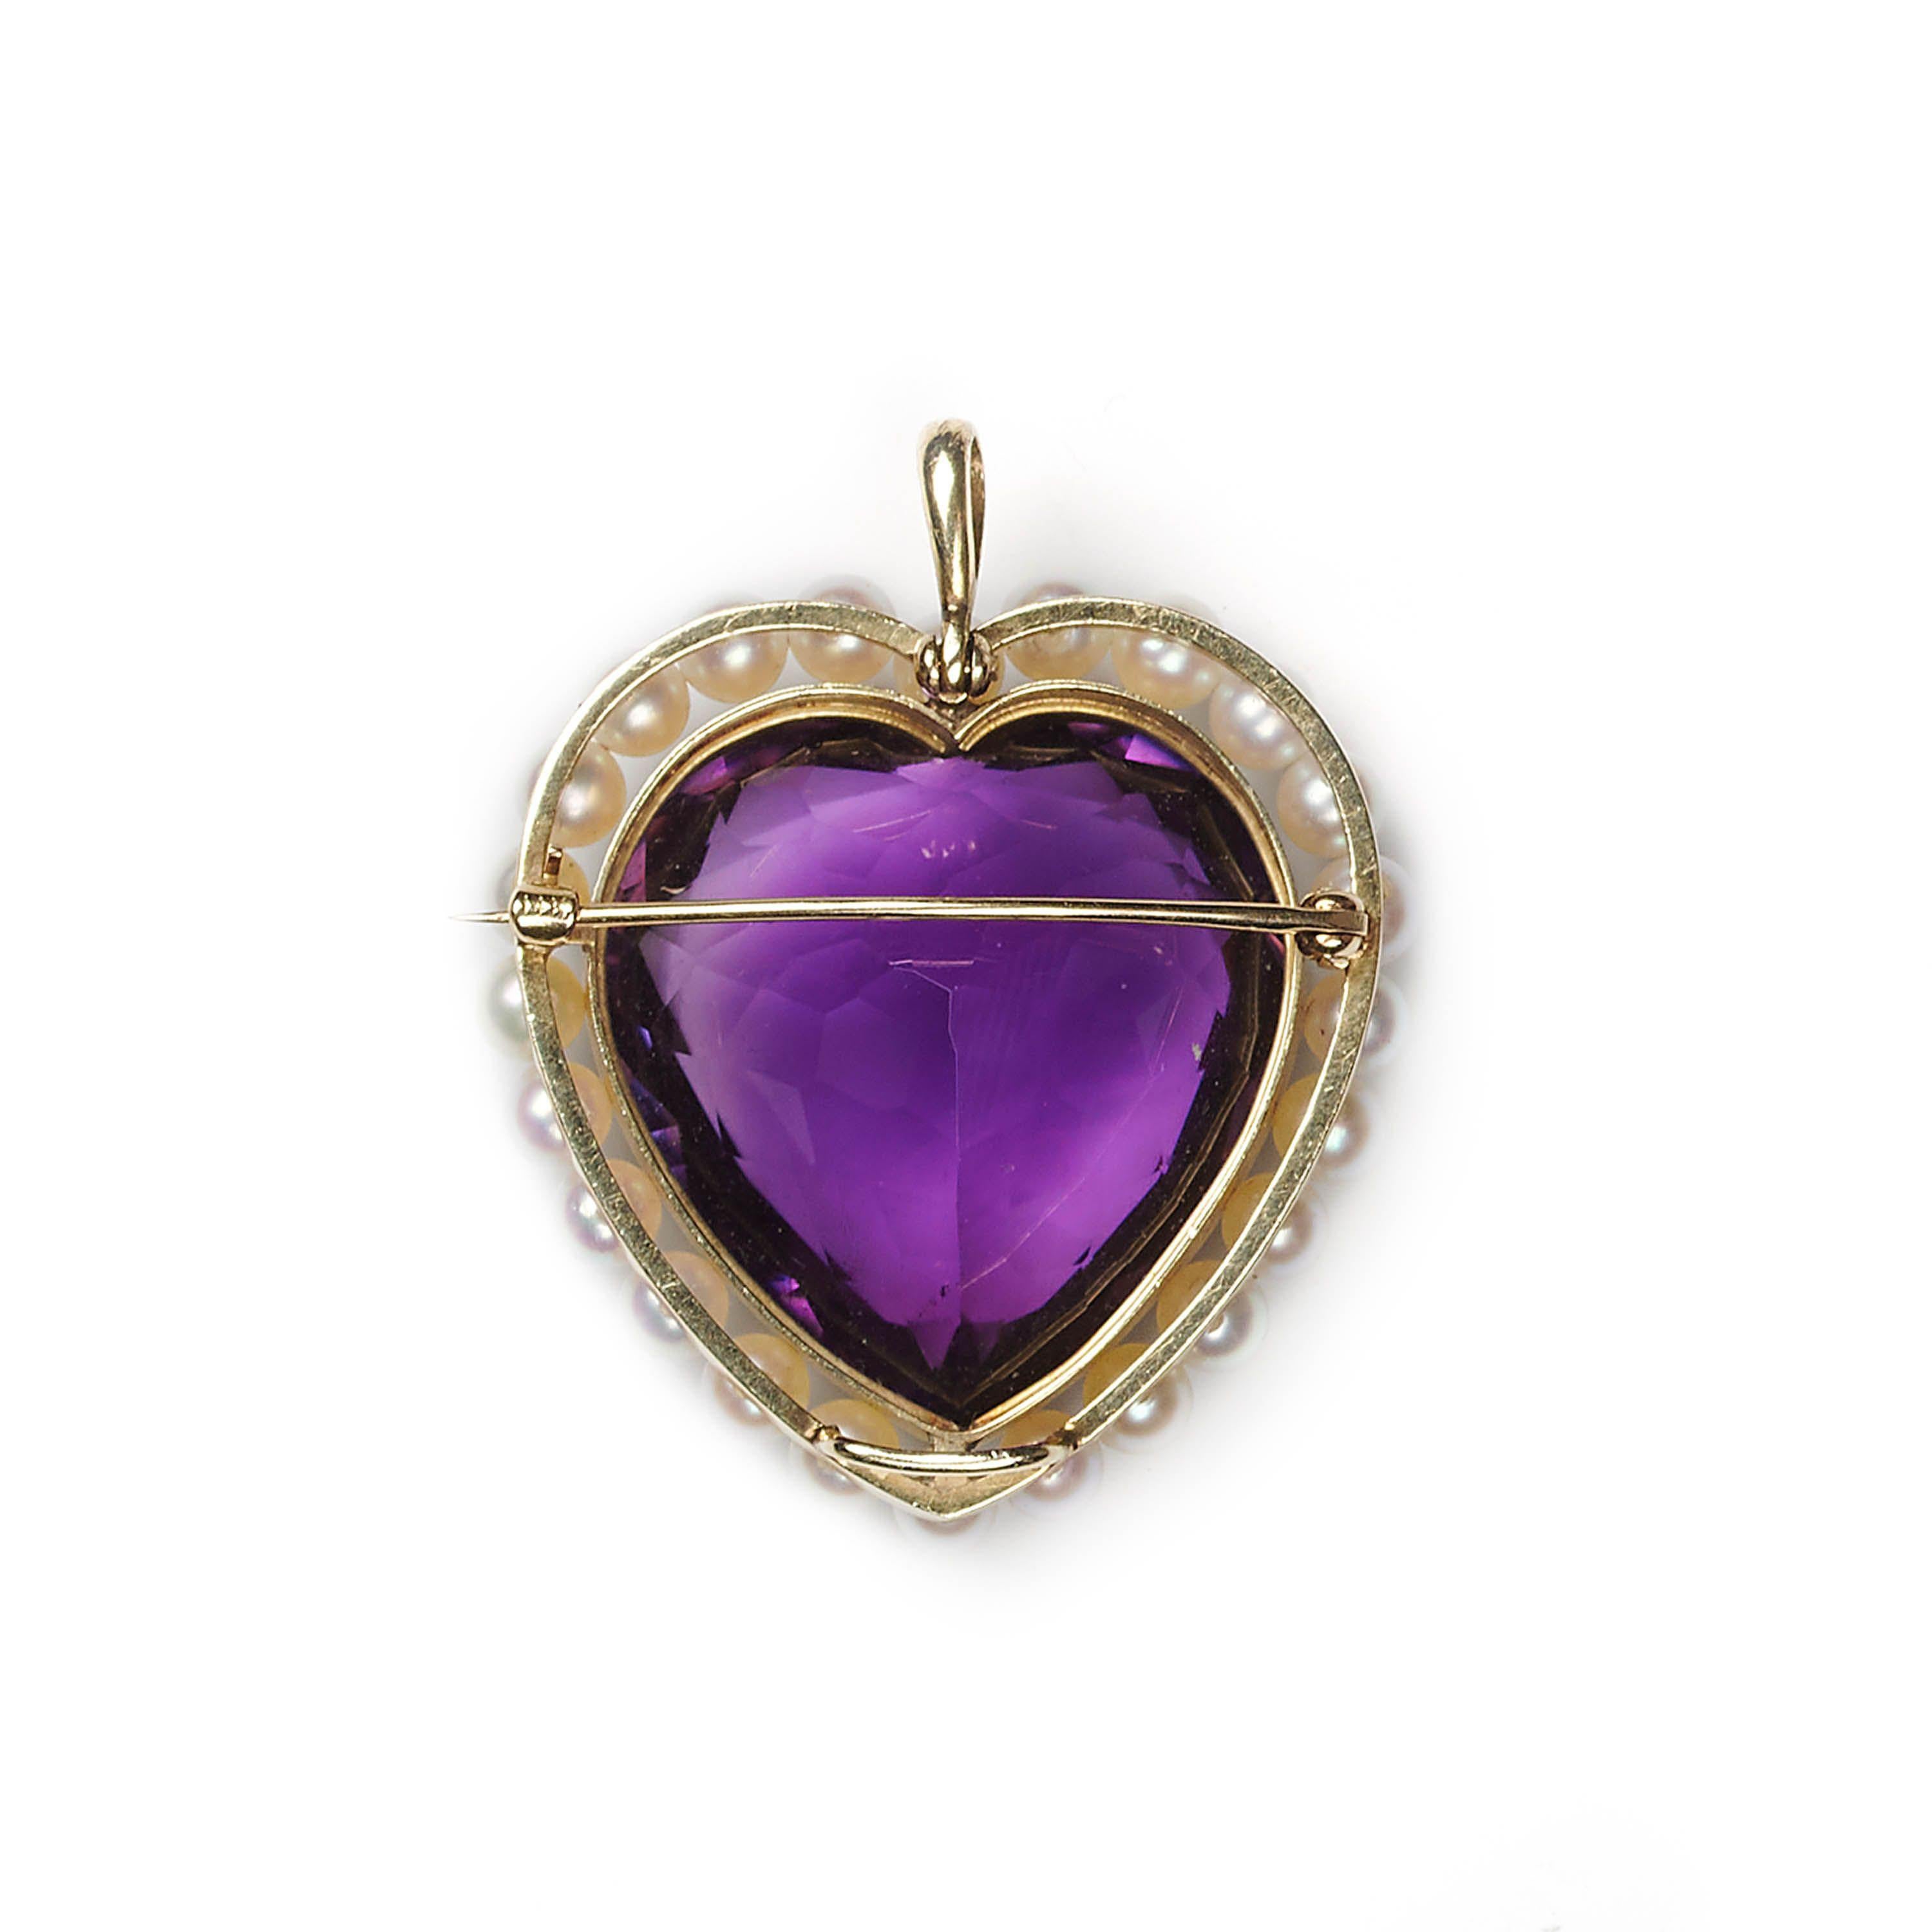 Vintage Amethyst, Cultured Pearl And Gold Heart Brooch Pendant, Circa 1970 In Good Condition For Sale In London, GB